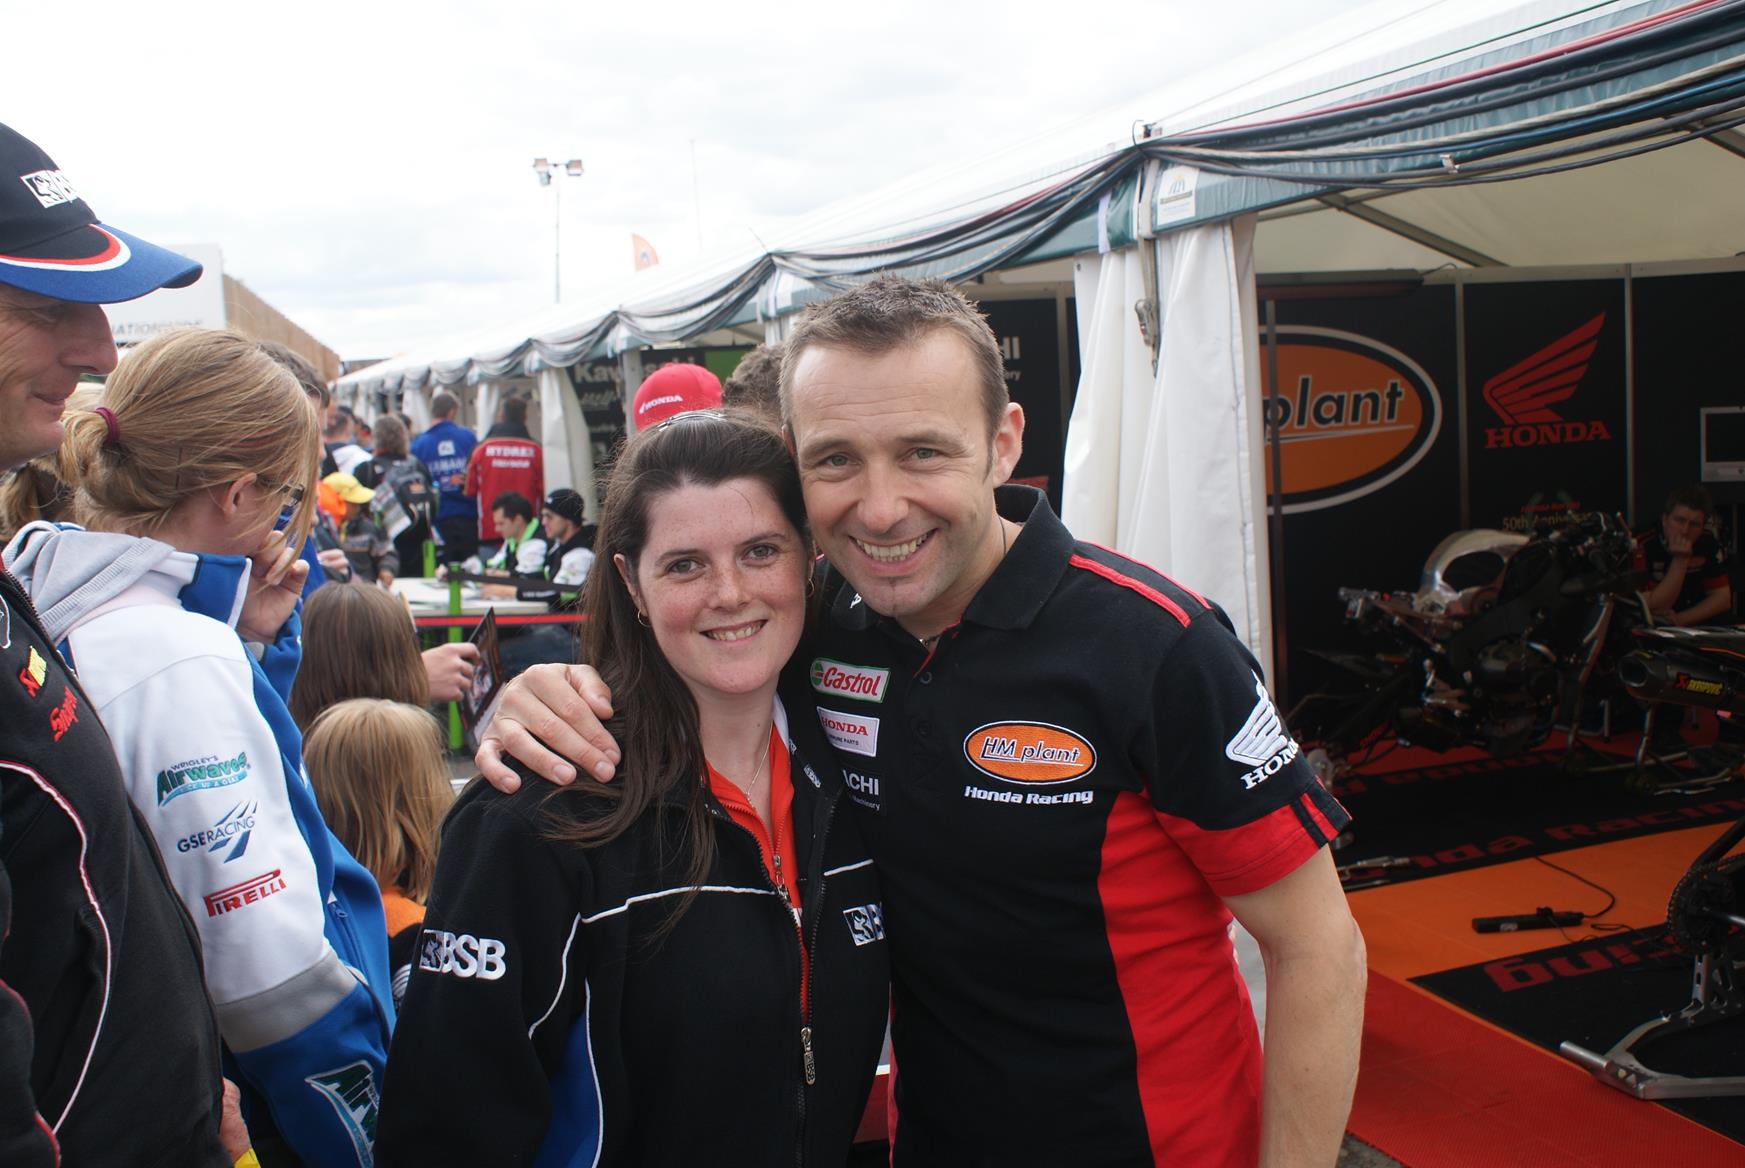 Meeting Plater at Mallory Park | MCN